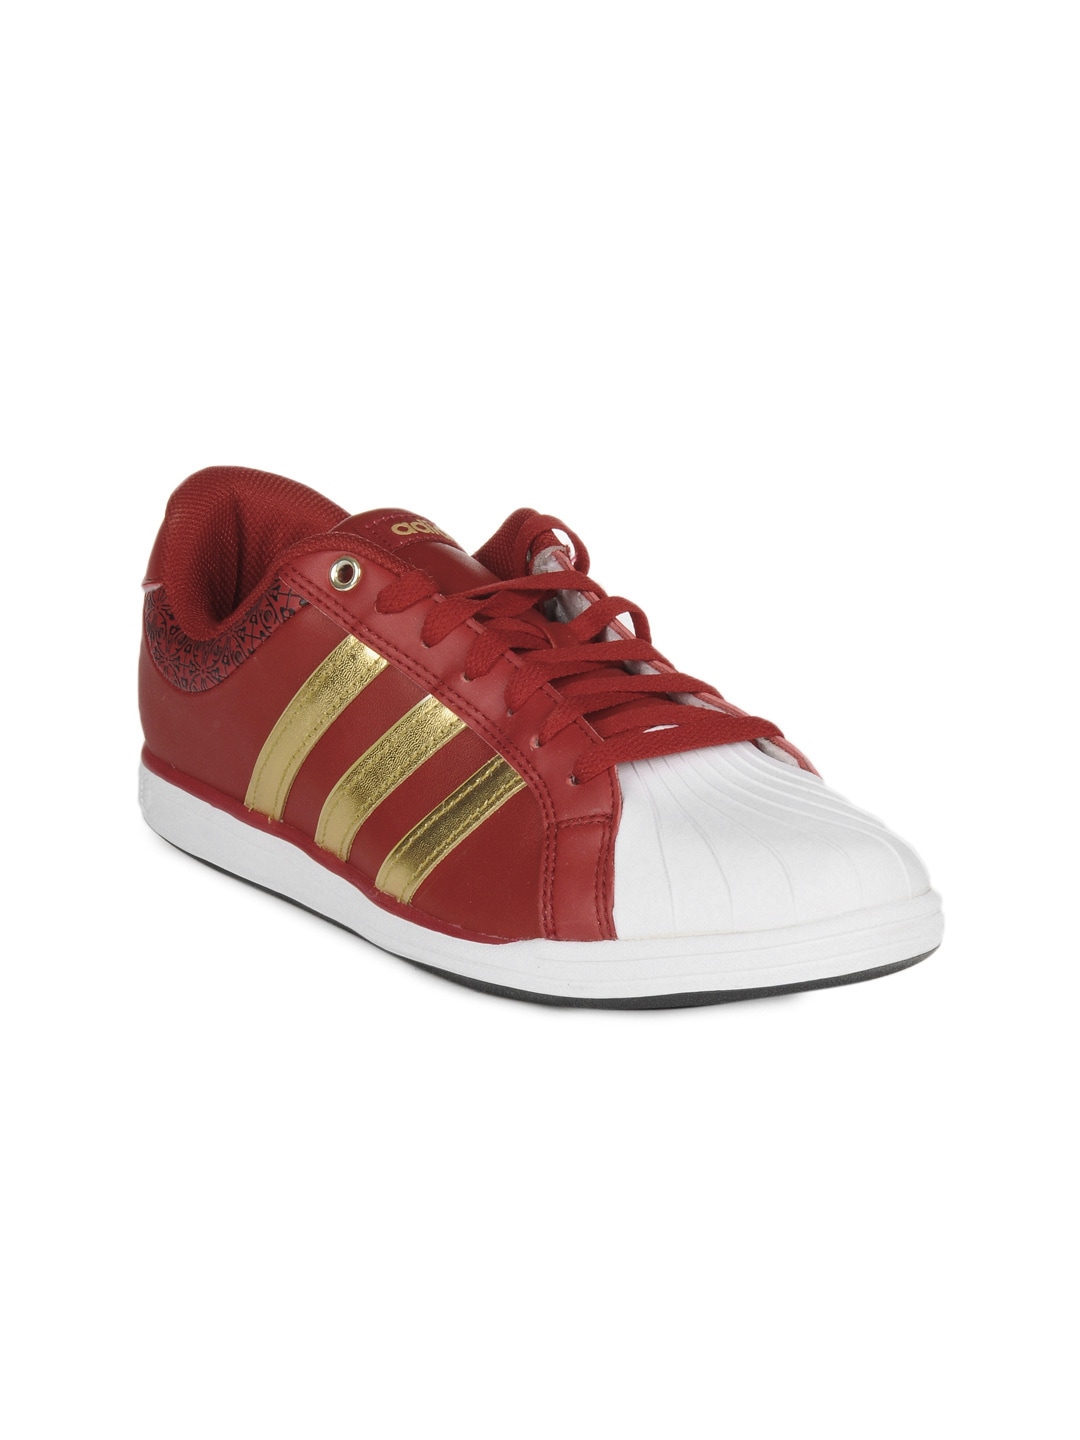 ADIDAS Unisex Red Neo Shell Comic Shoes